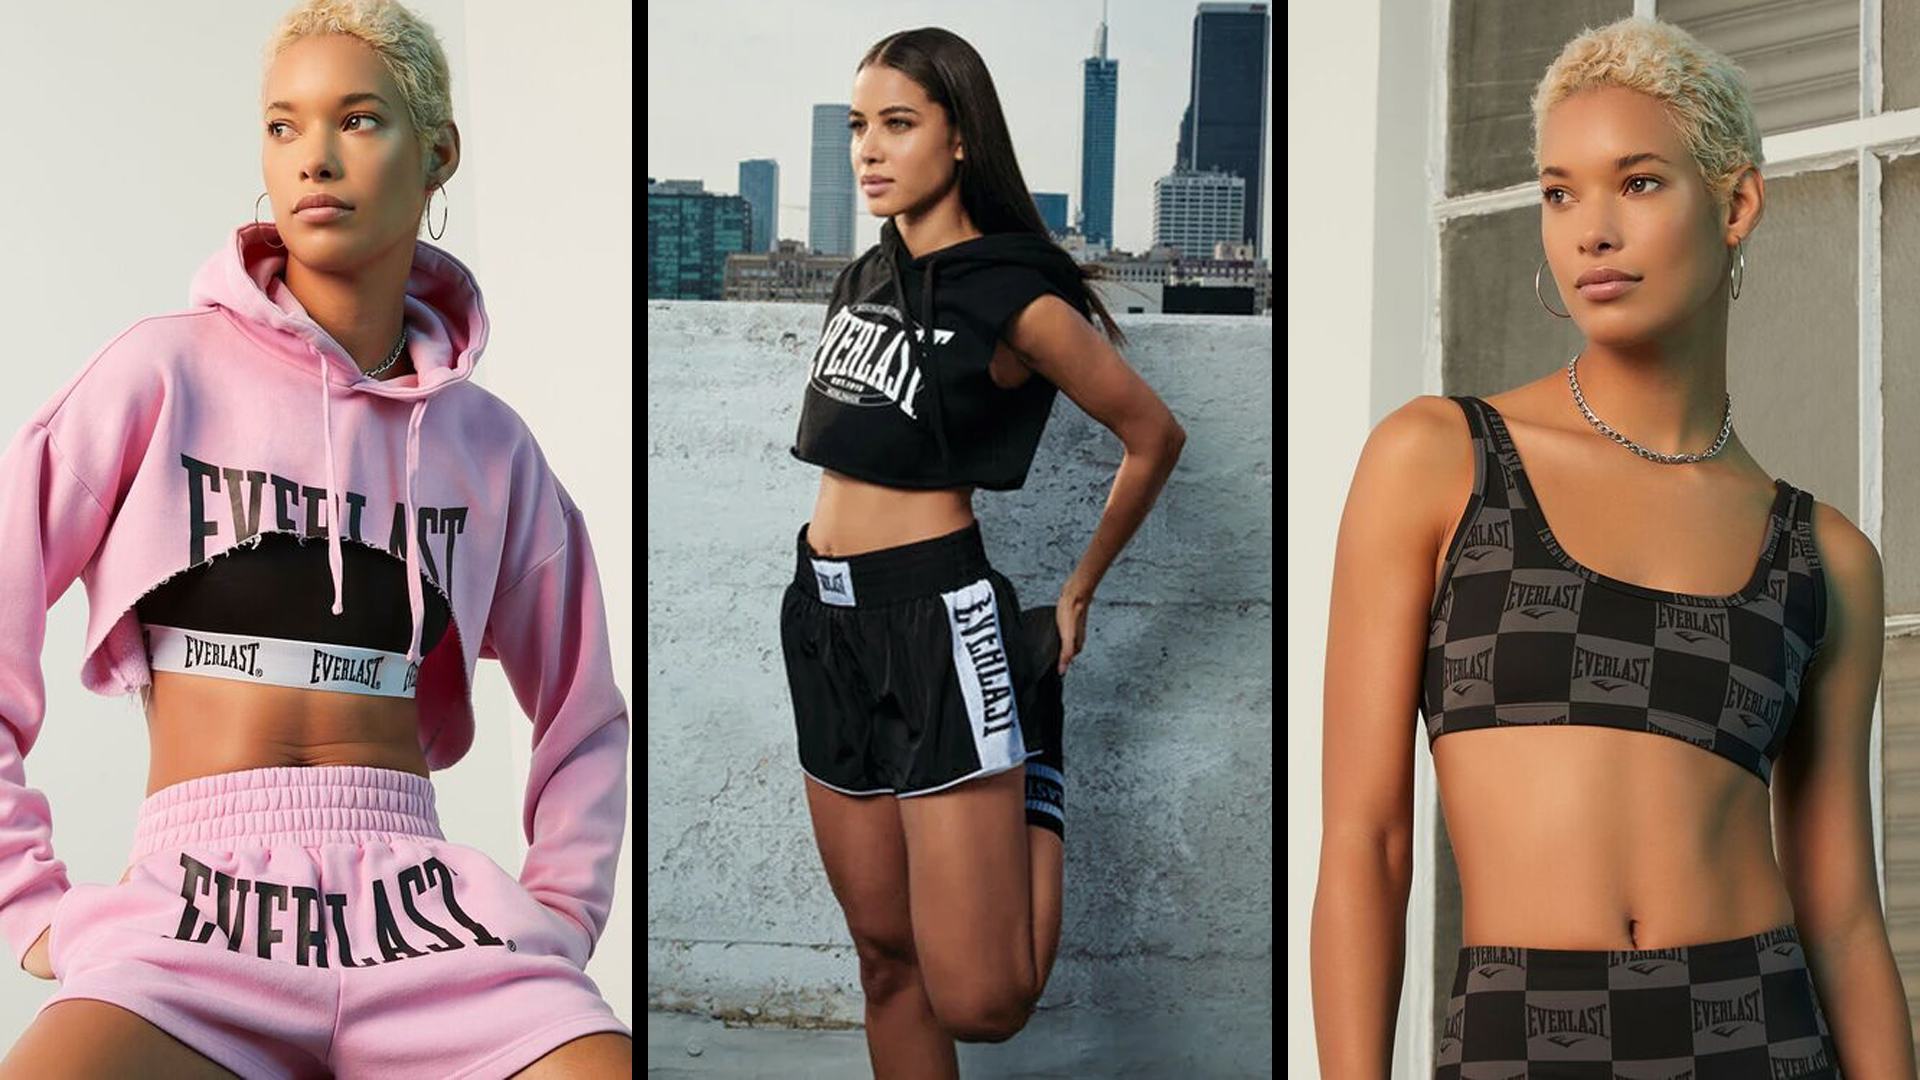 Forever 21 And Everlast Have Teamed Up For An Exclusive Collection